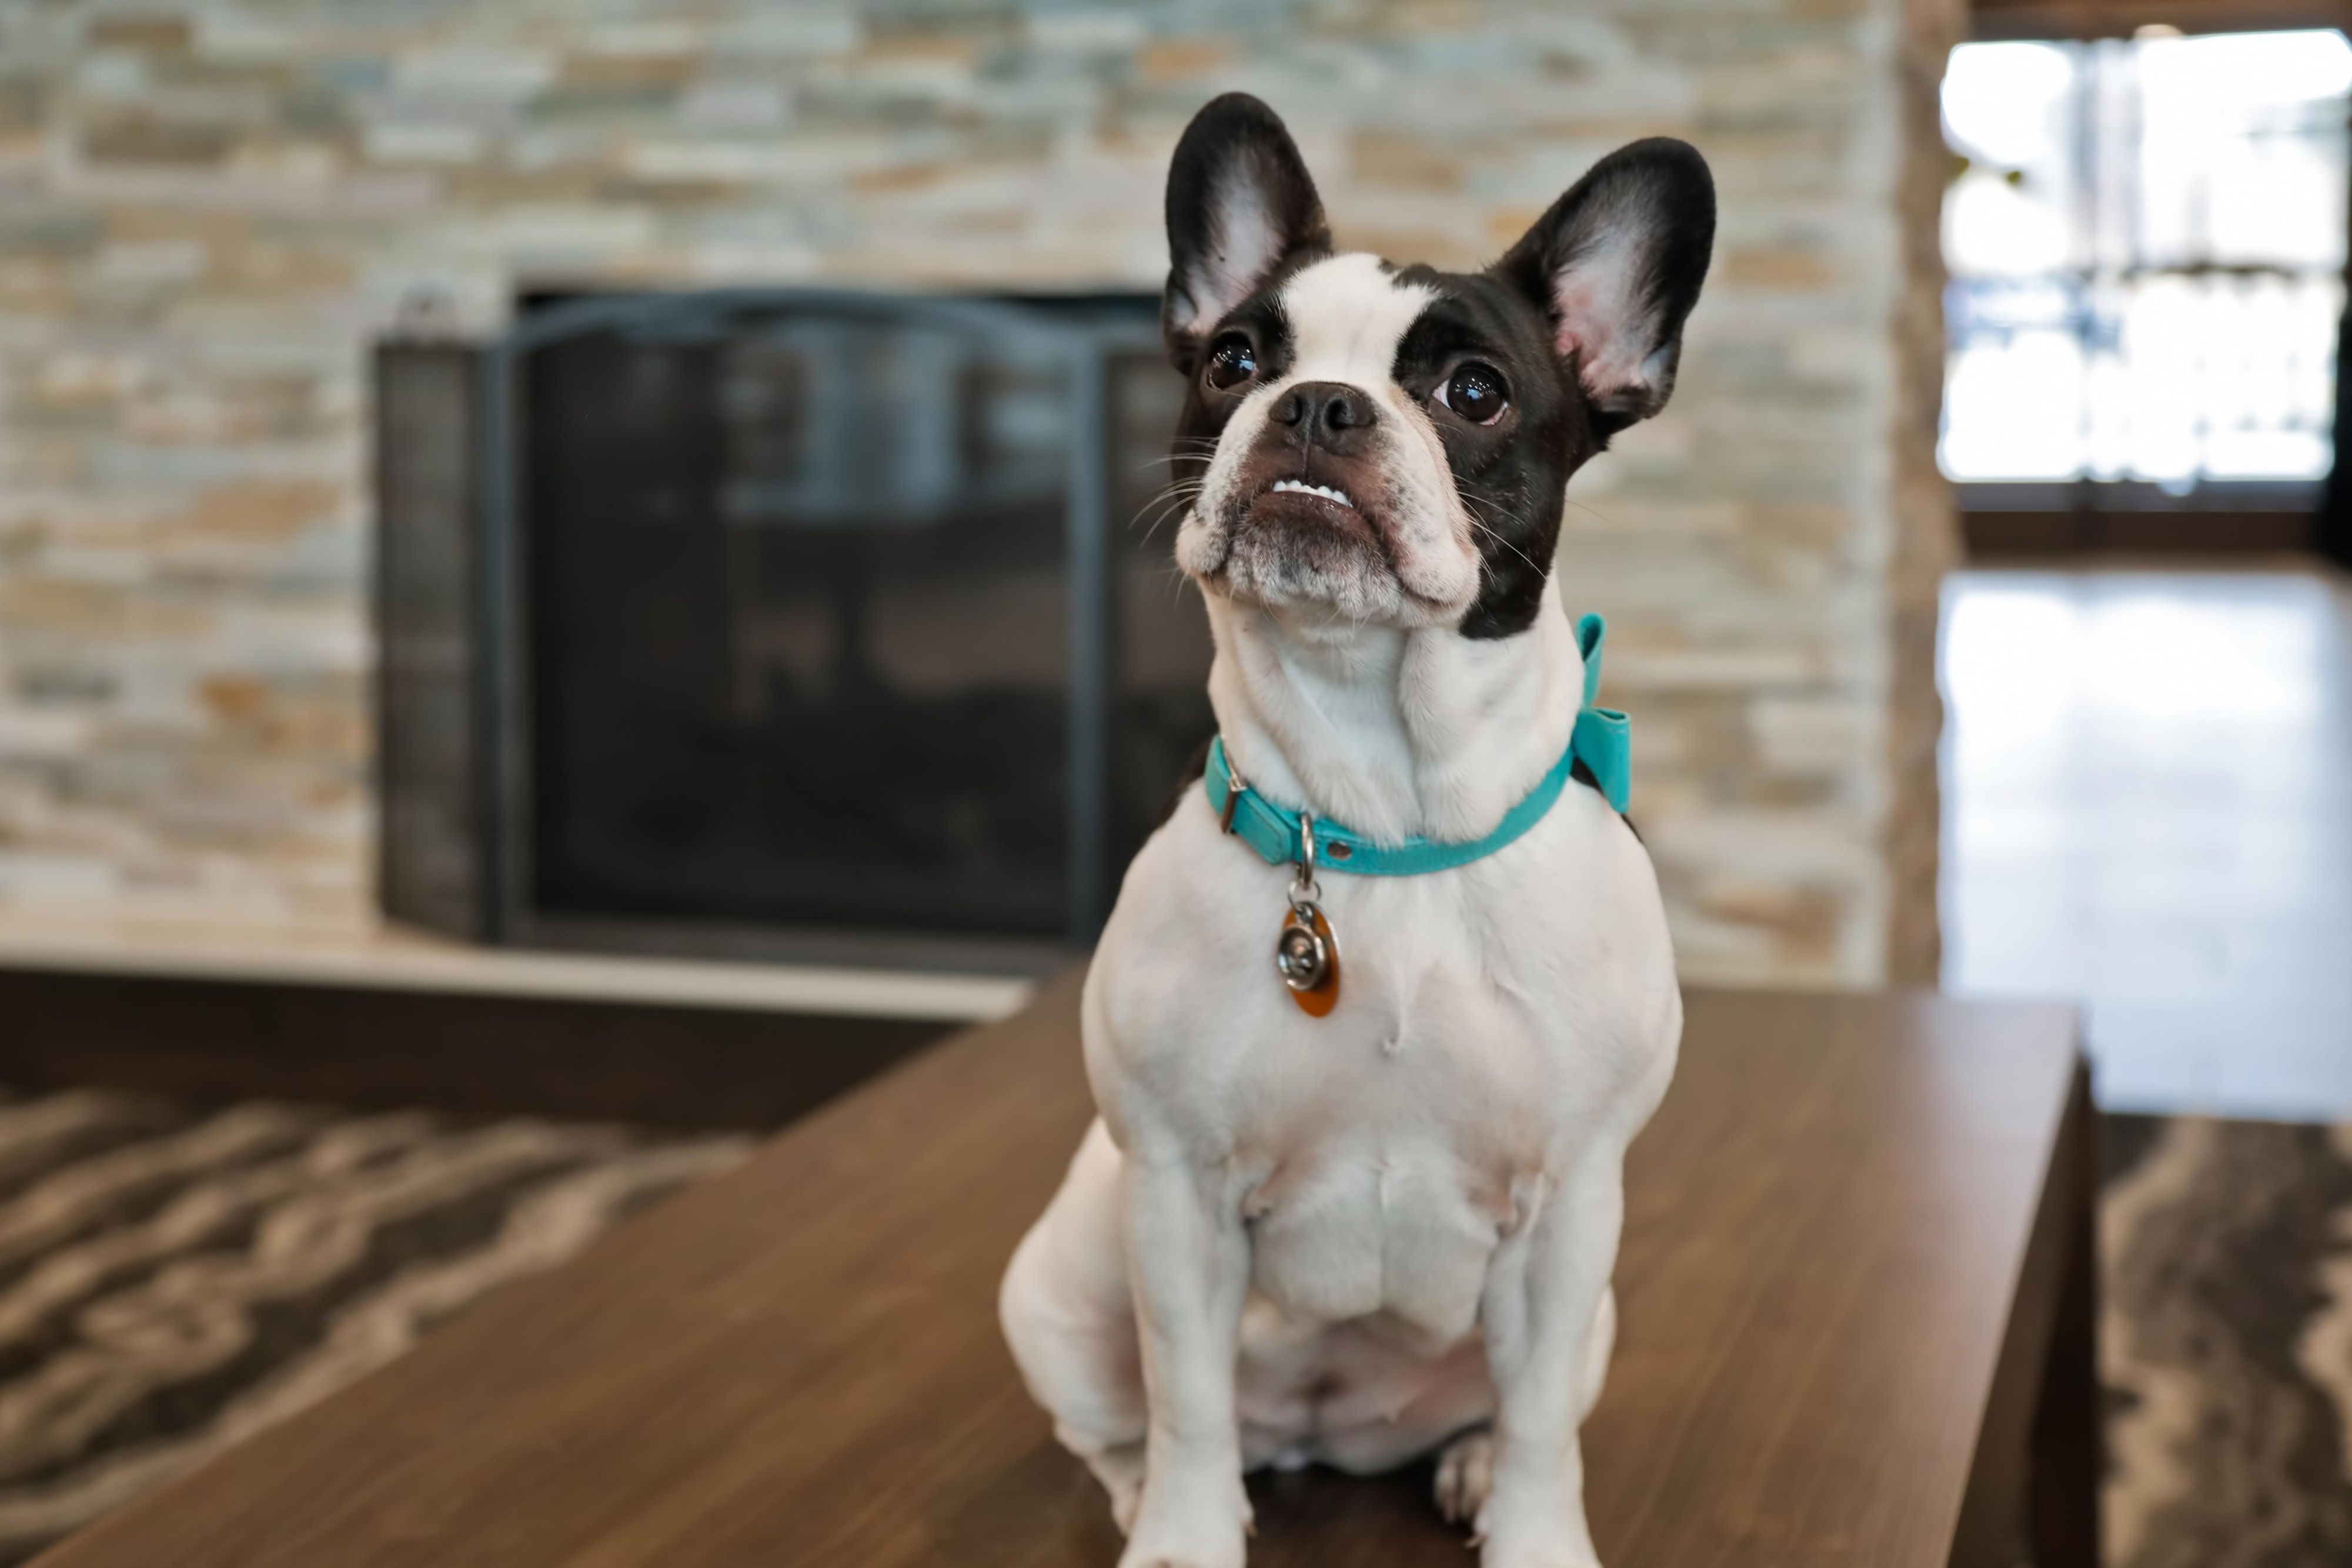 Your furry friends are welcome here too. Fees and restrictions apply. Please contact the front desk for our pet policies and to have them add your pet to your reservation.